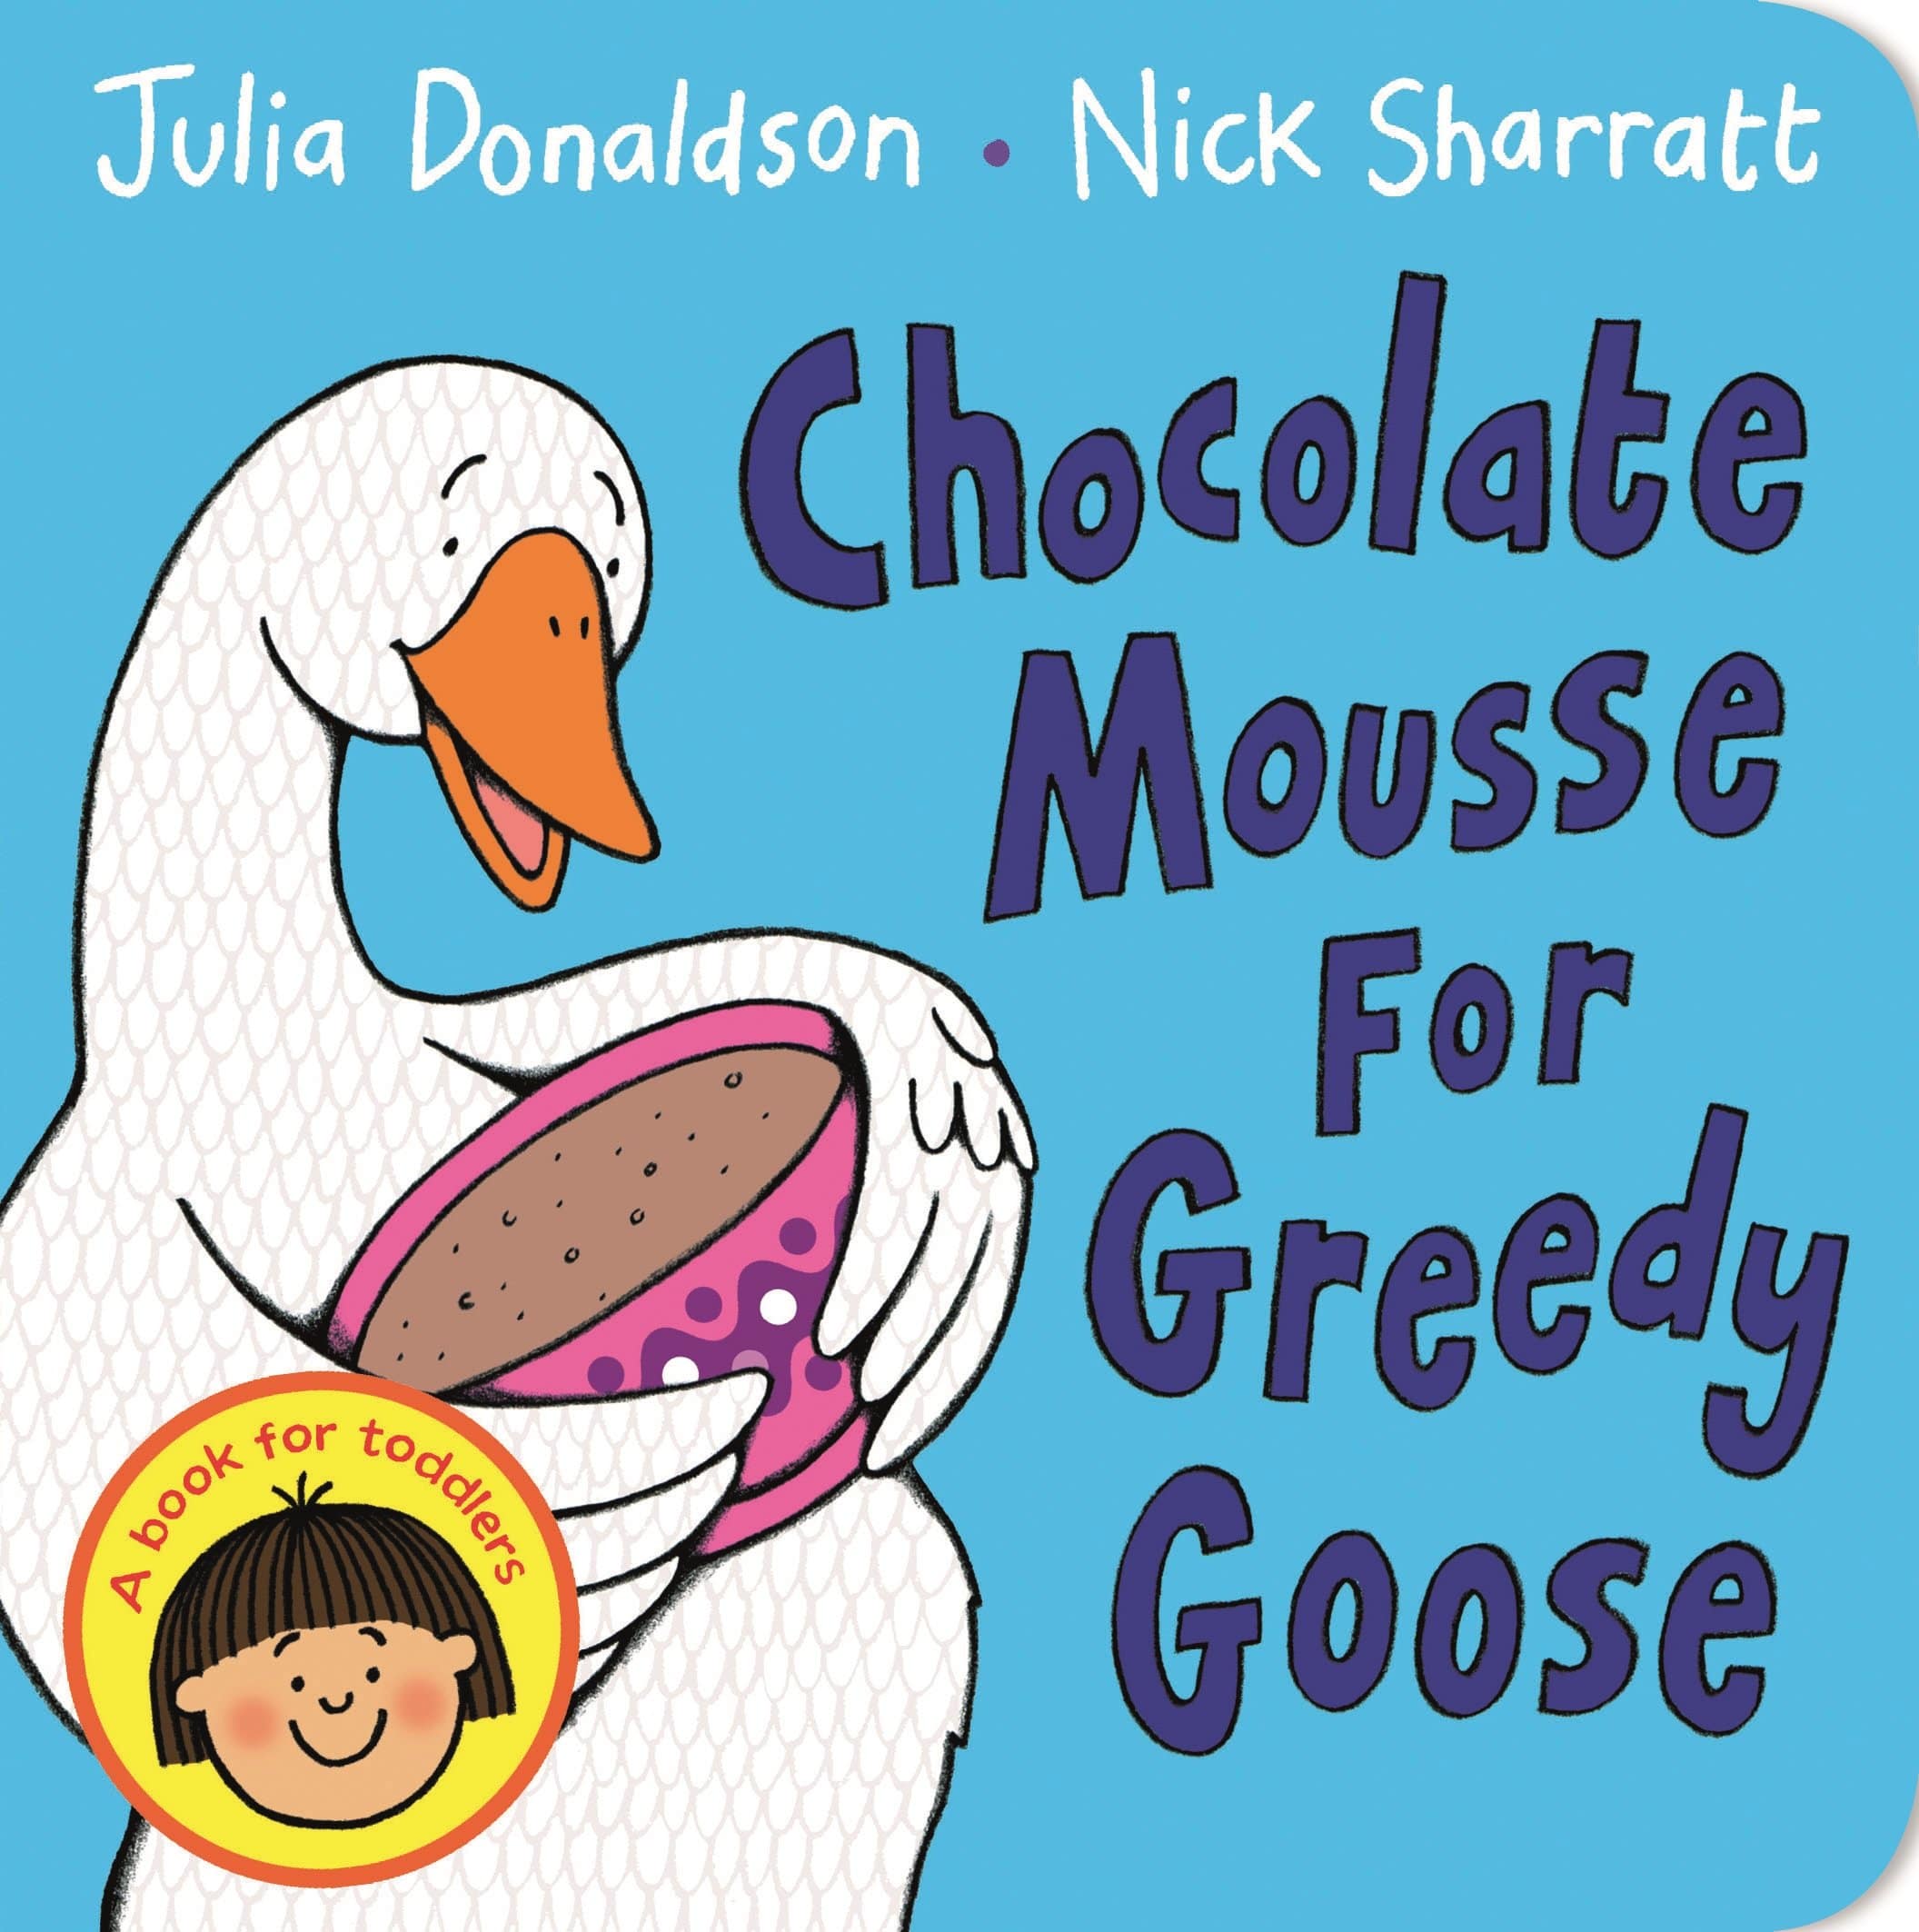 IMG : Choclate Mousse for greedy Goose